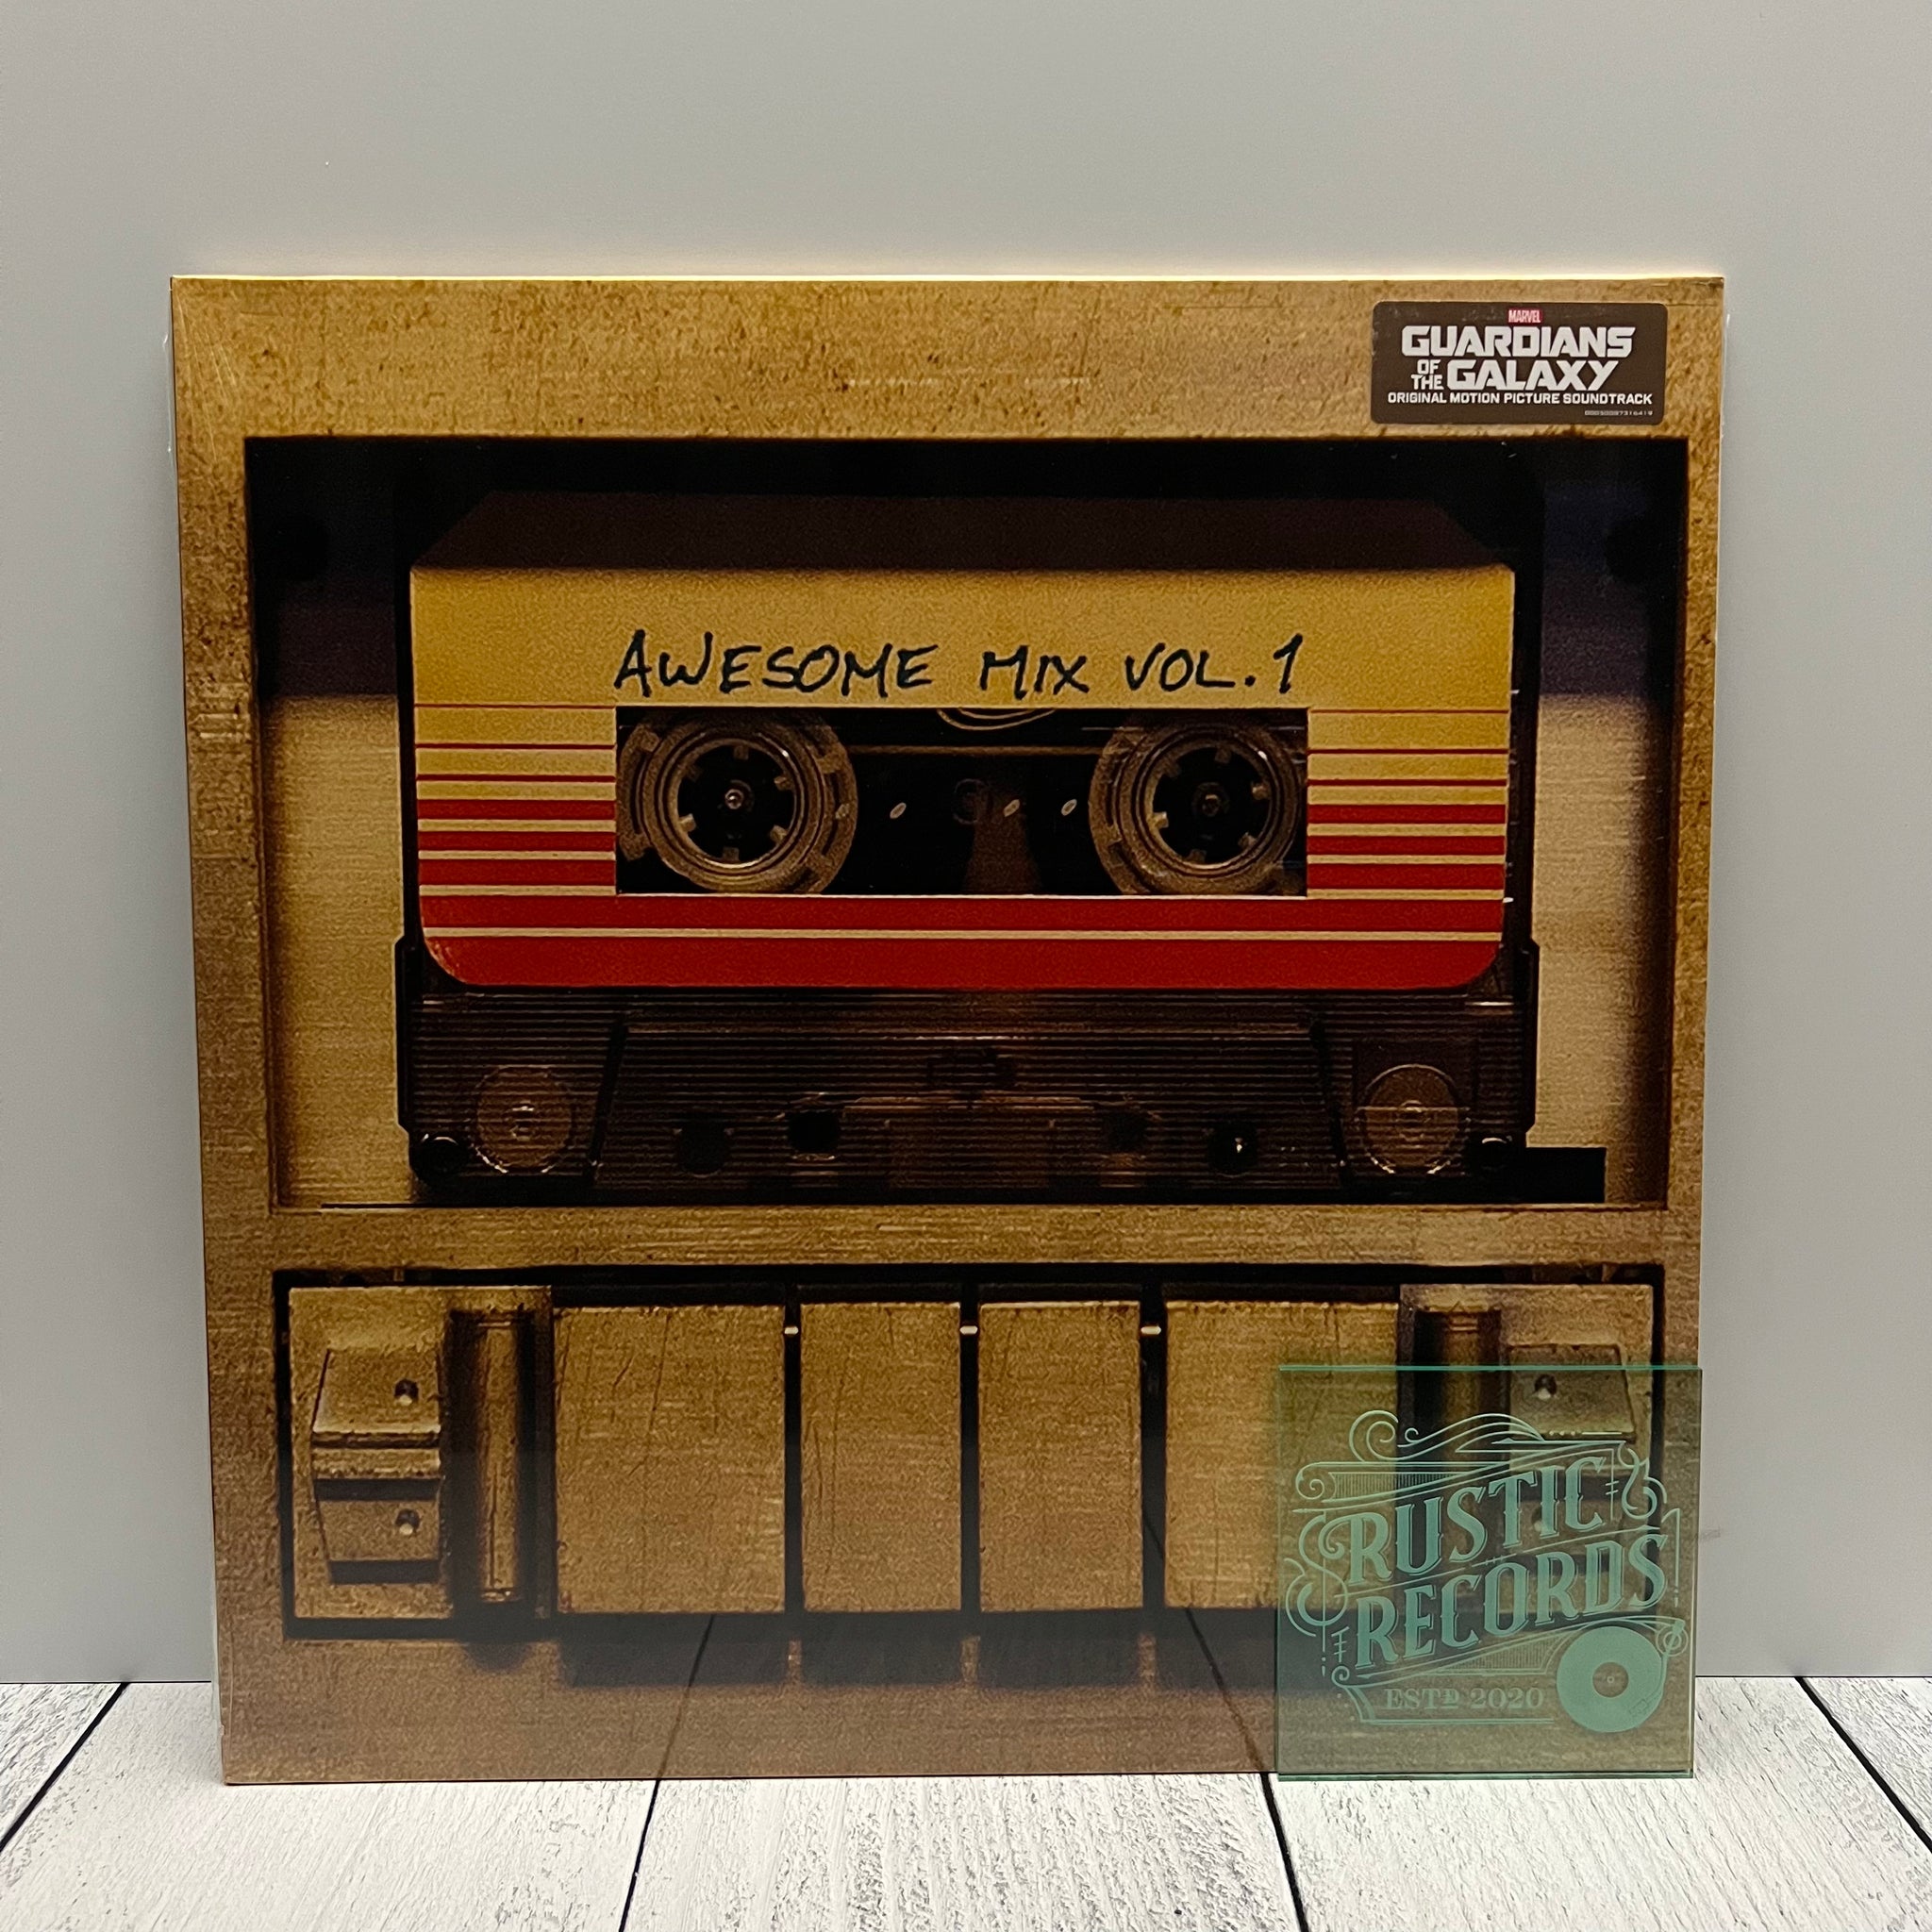 Guardians Of The Galaxy Volume 1 Soundtrack